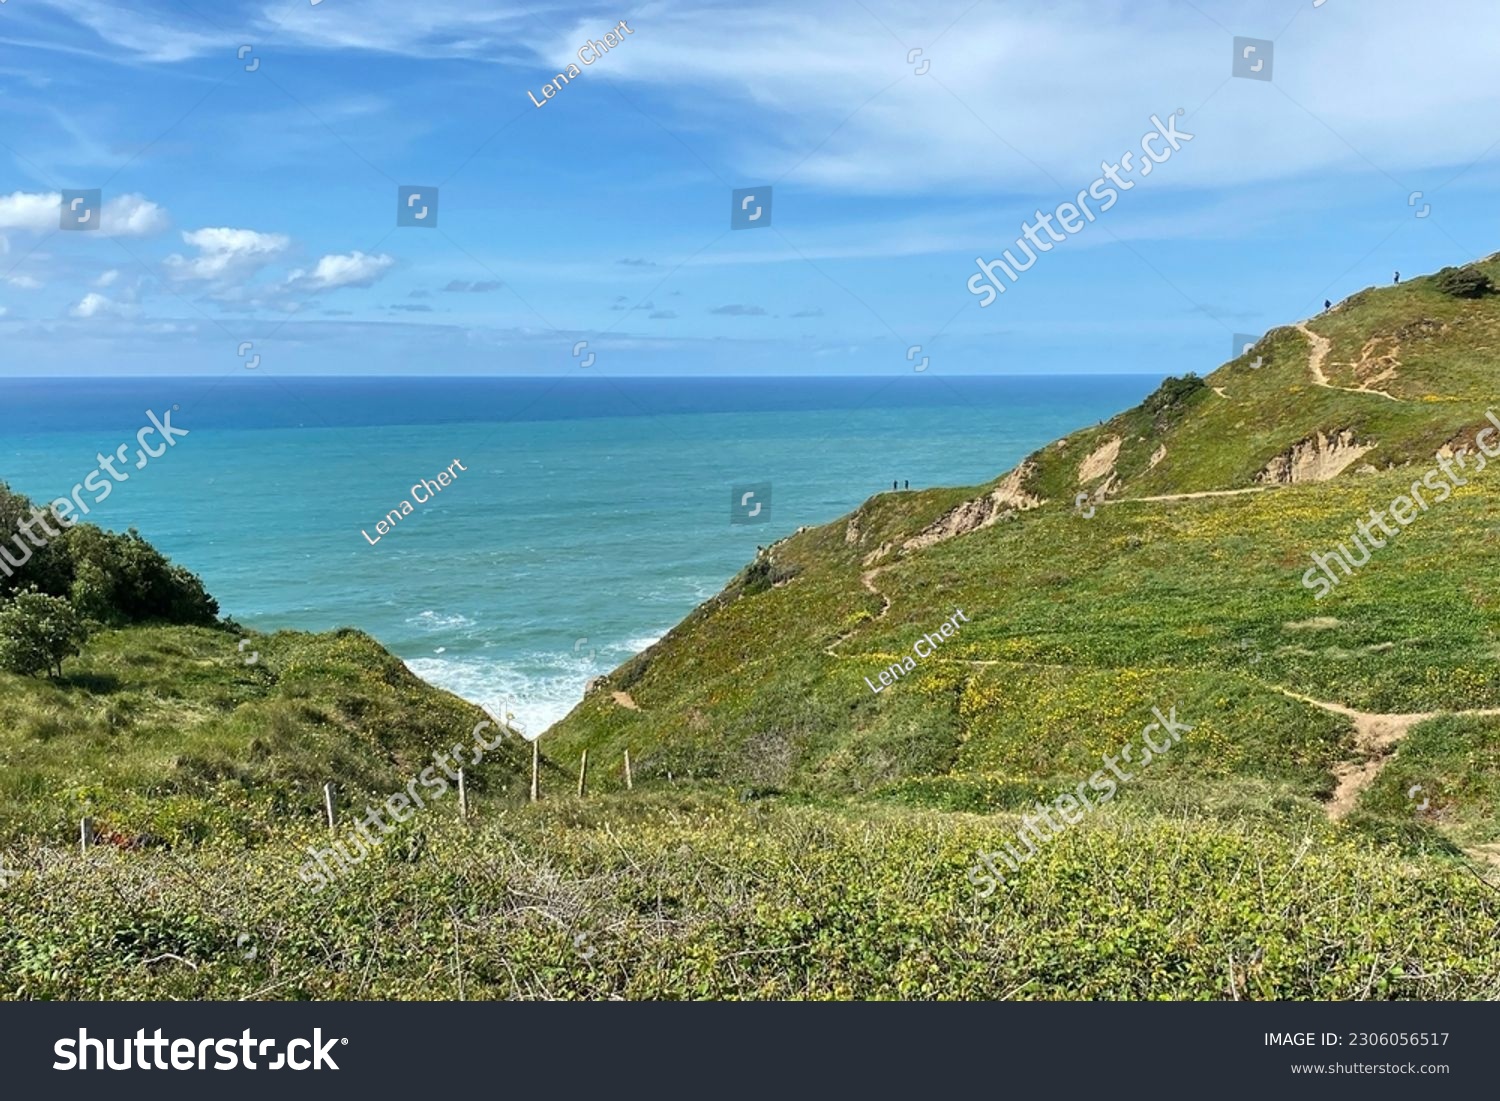 Panorama of the ocean coast and rock bay, Atlantic Ocean, beautiful cloudscape, dramatic landscape, colorful seascape with sheer rocks, travel content, Lisbon, Portugal #2306056517